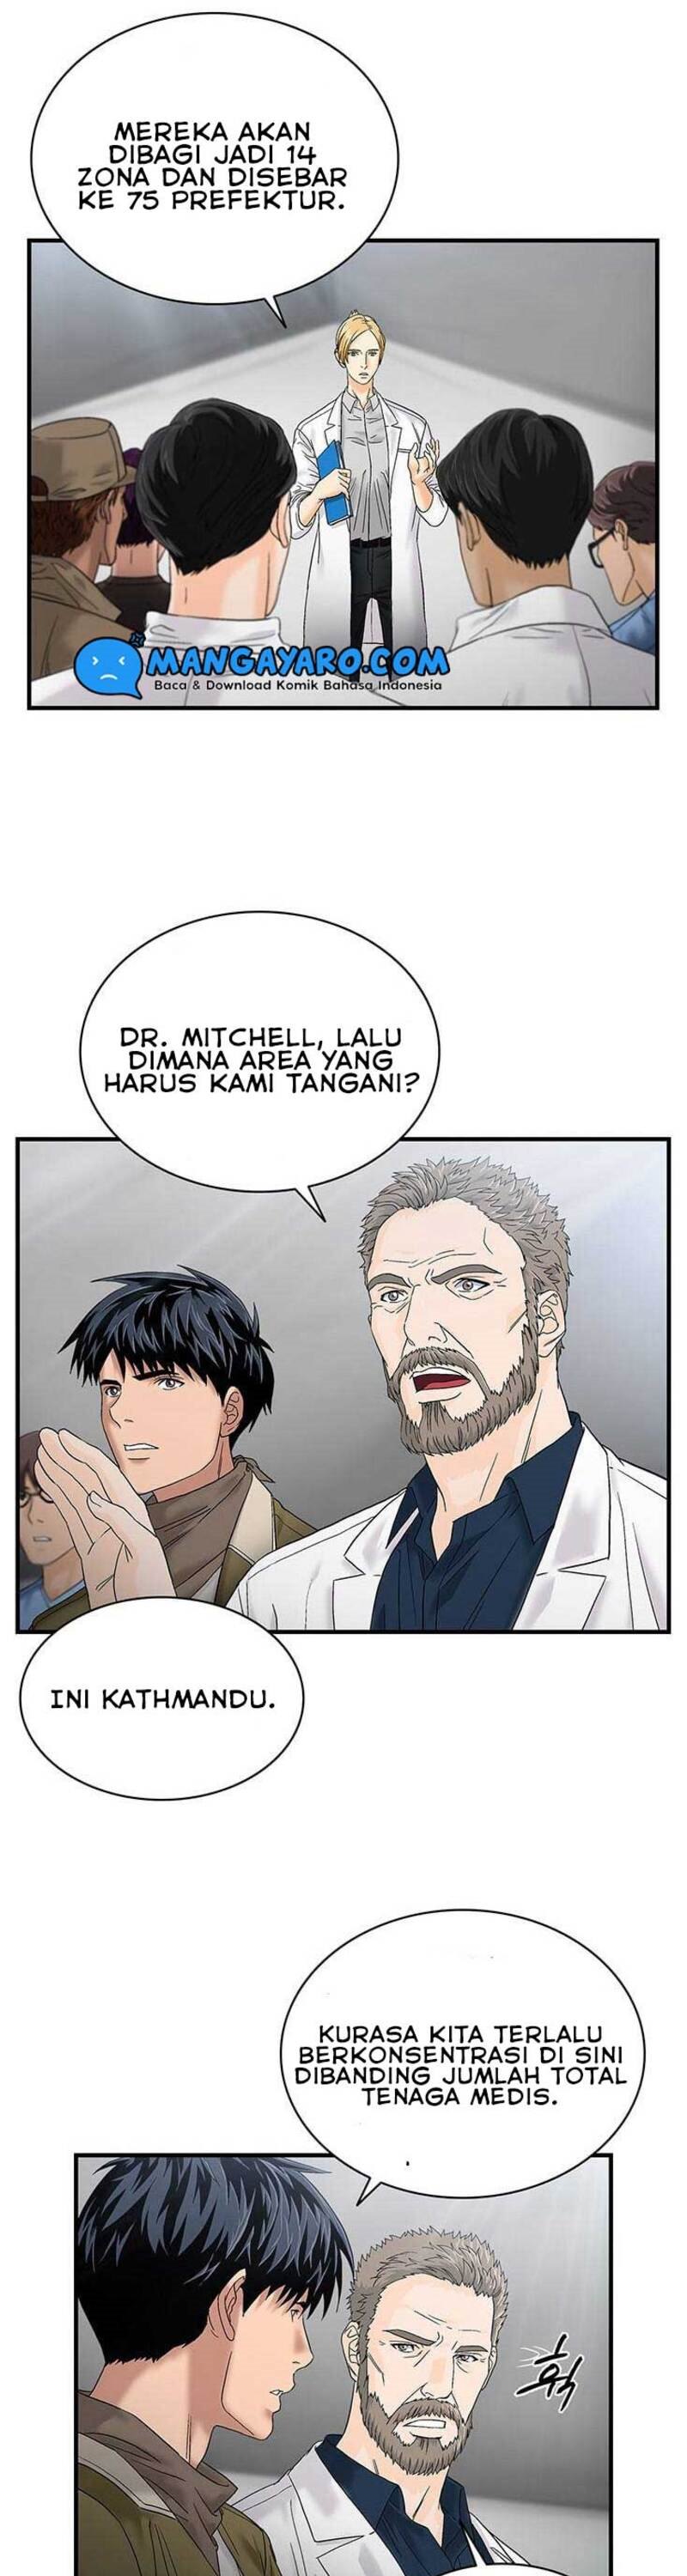 Dr. Choi Tae-Soo Chapter 51